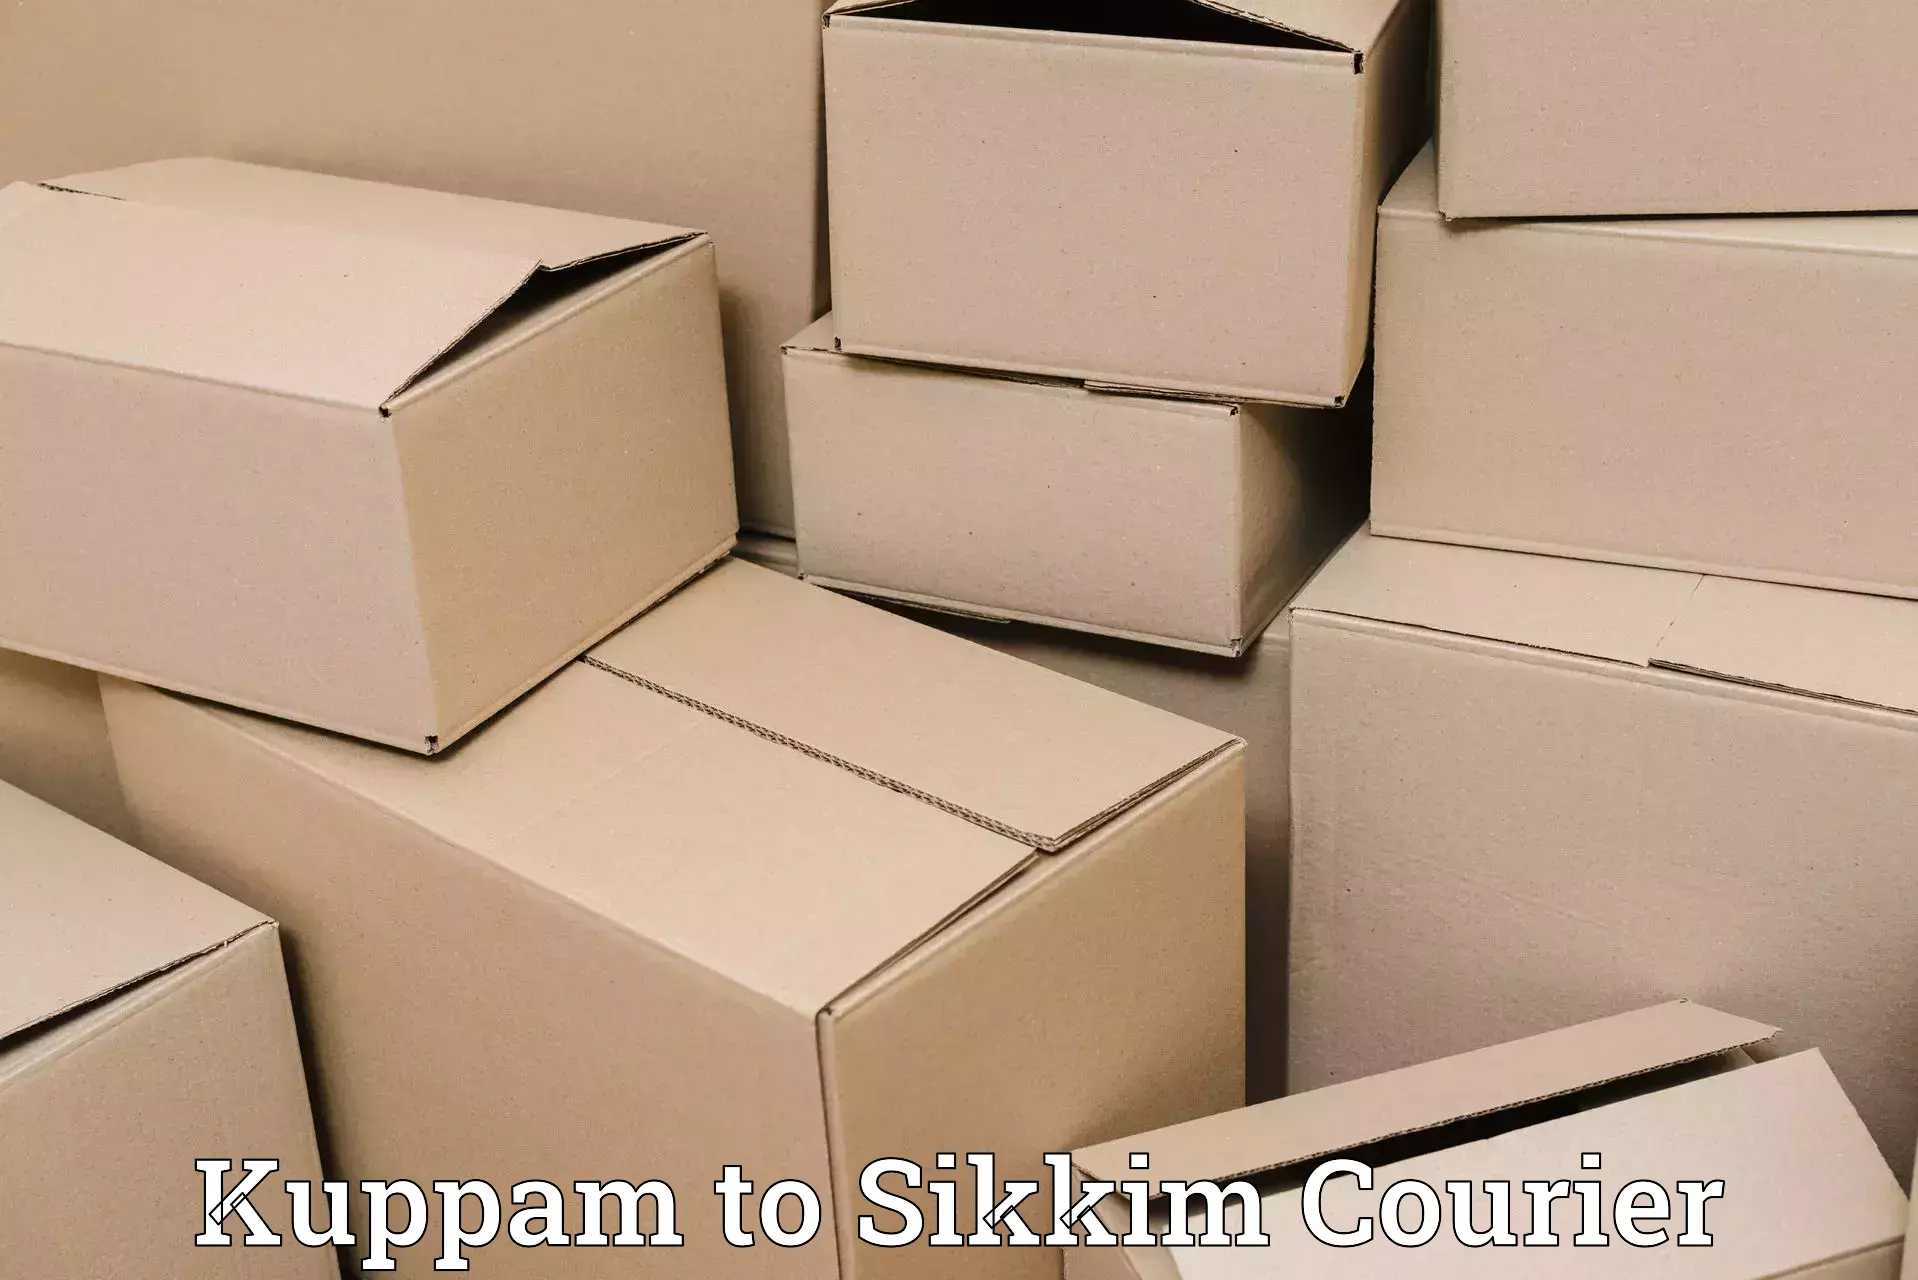 Seamless shipping experience in Kuppam to Pelling